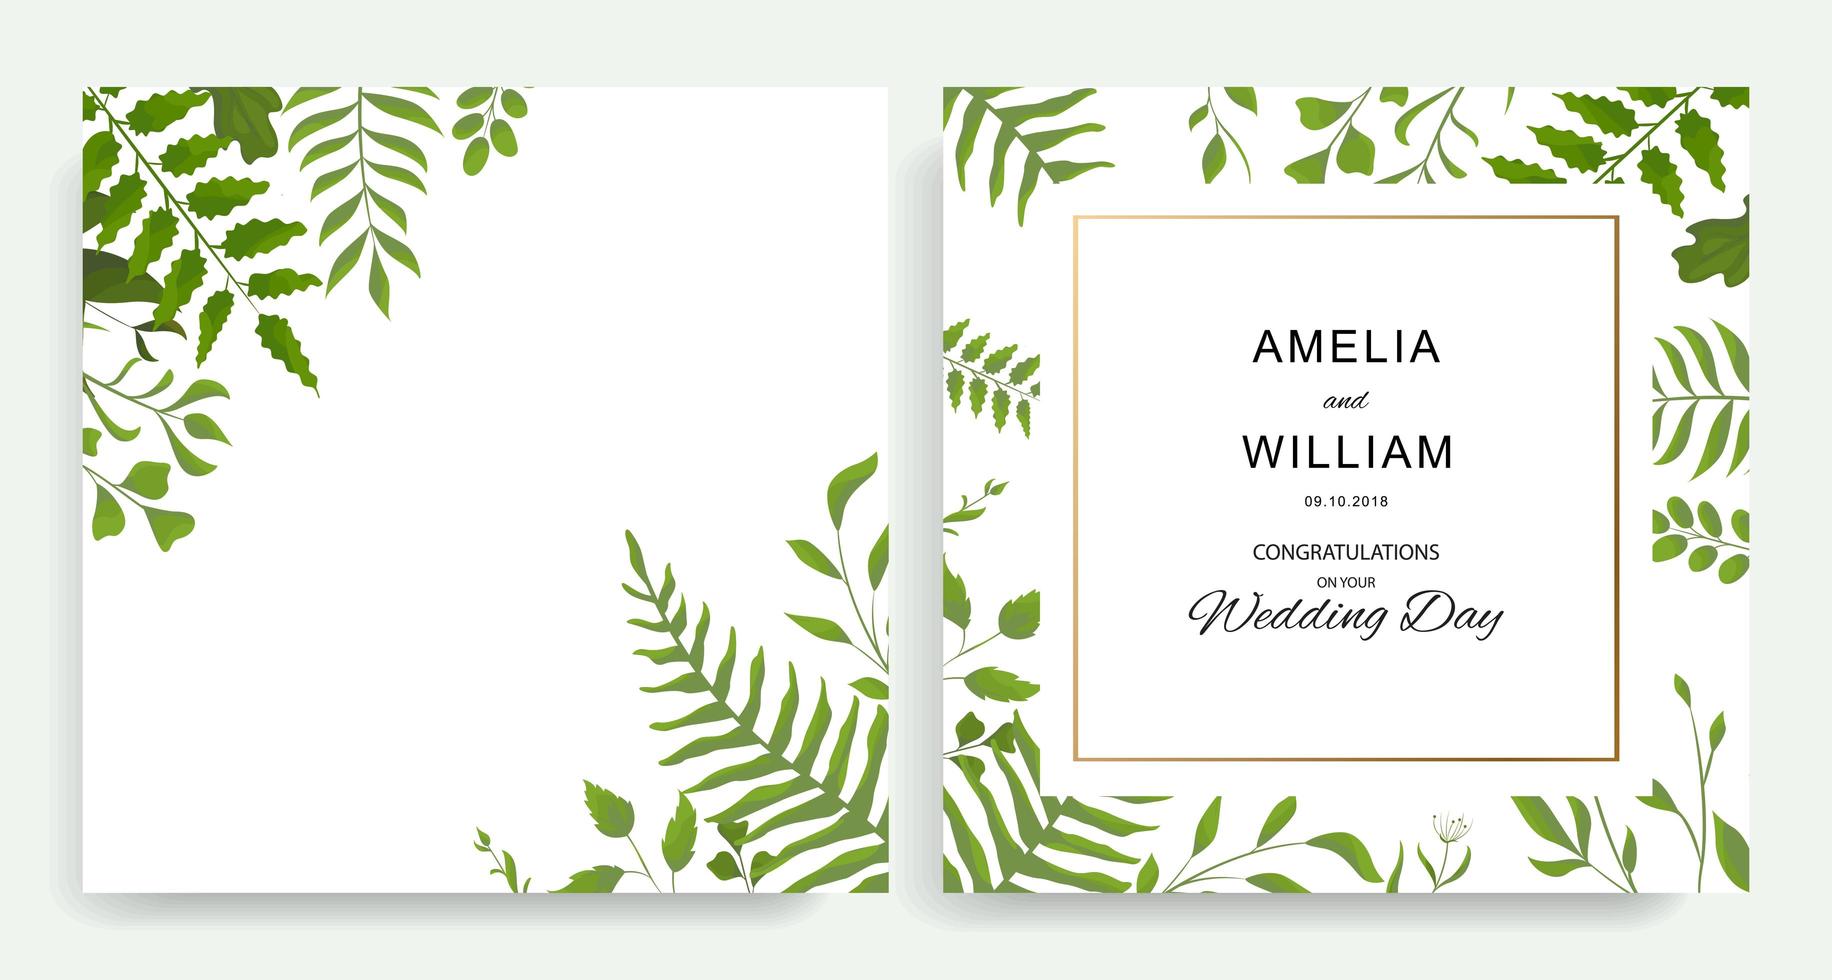 Square wedding invite cards with green leaves vector